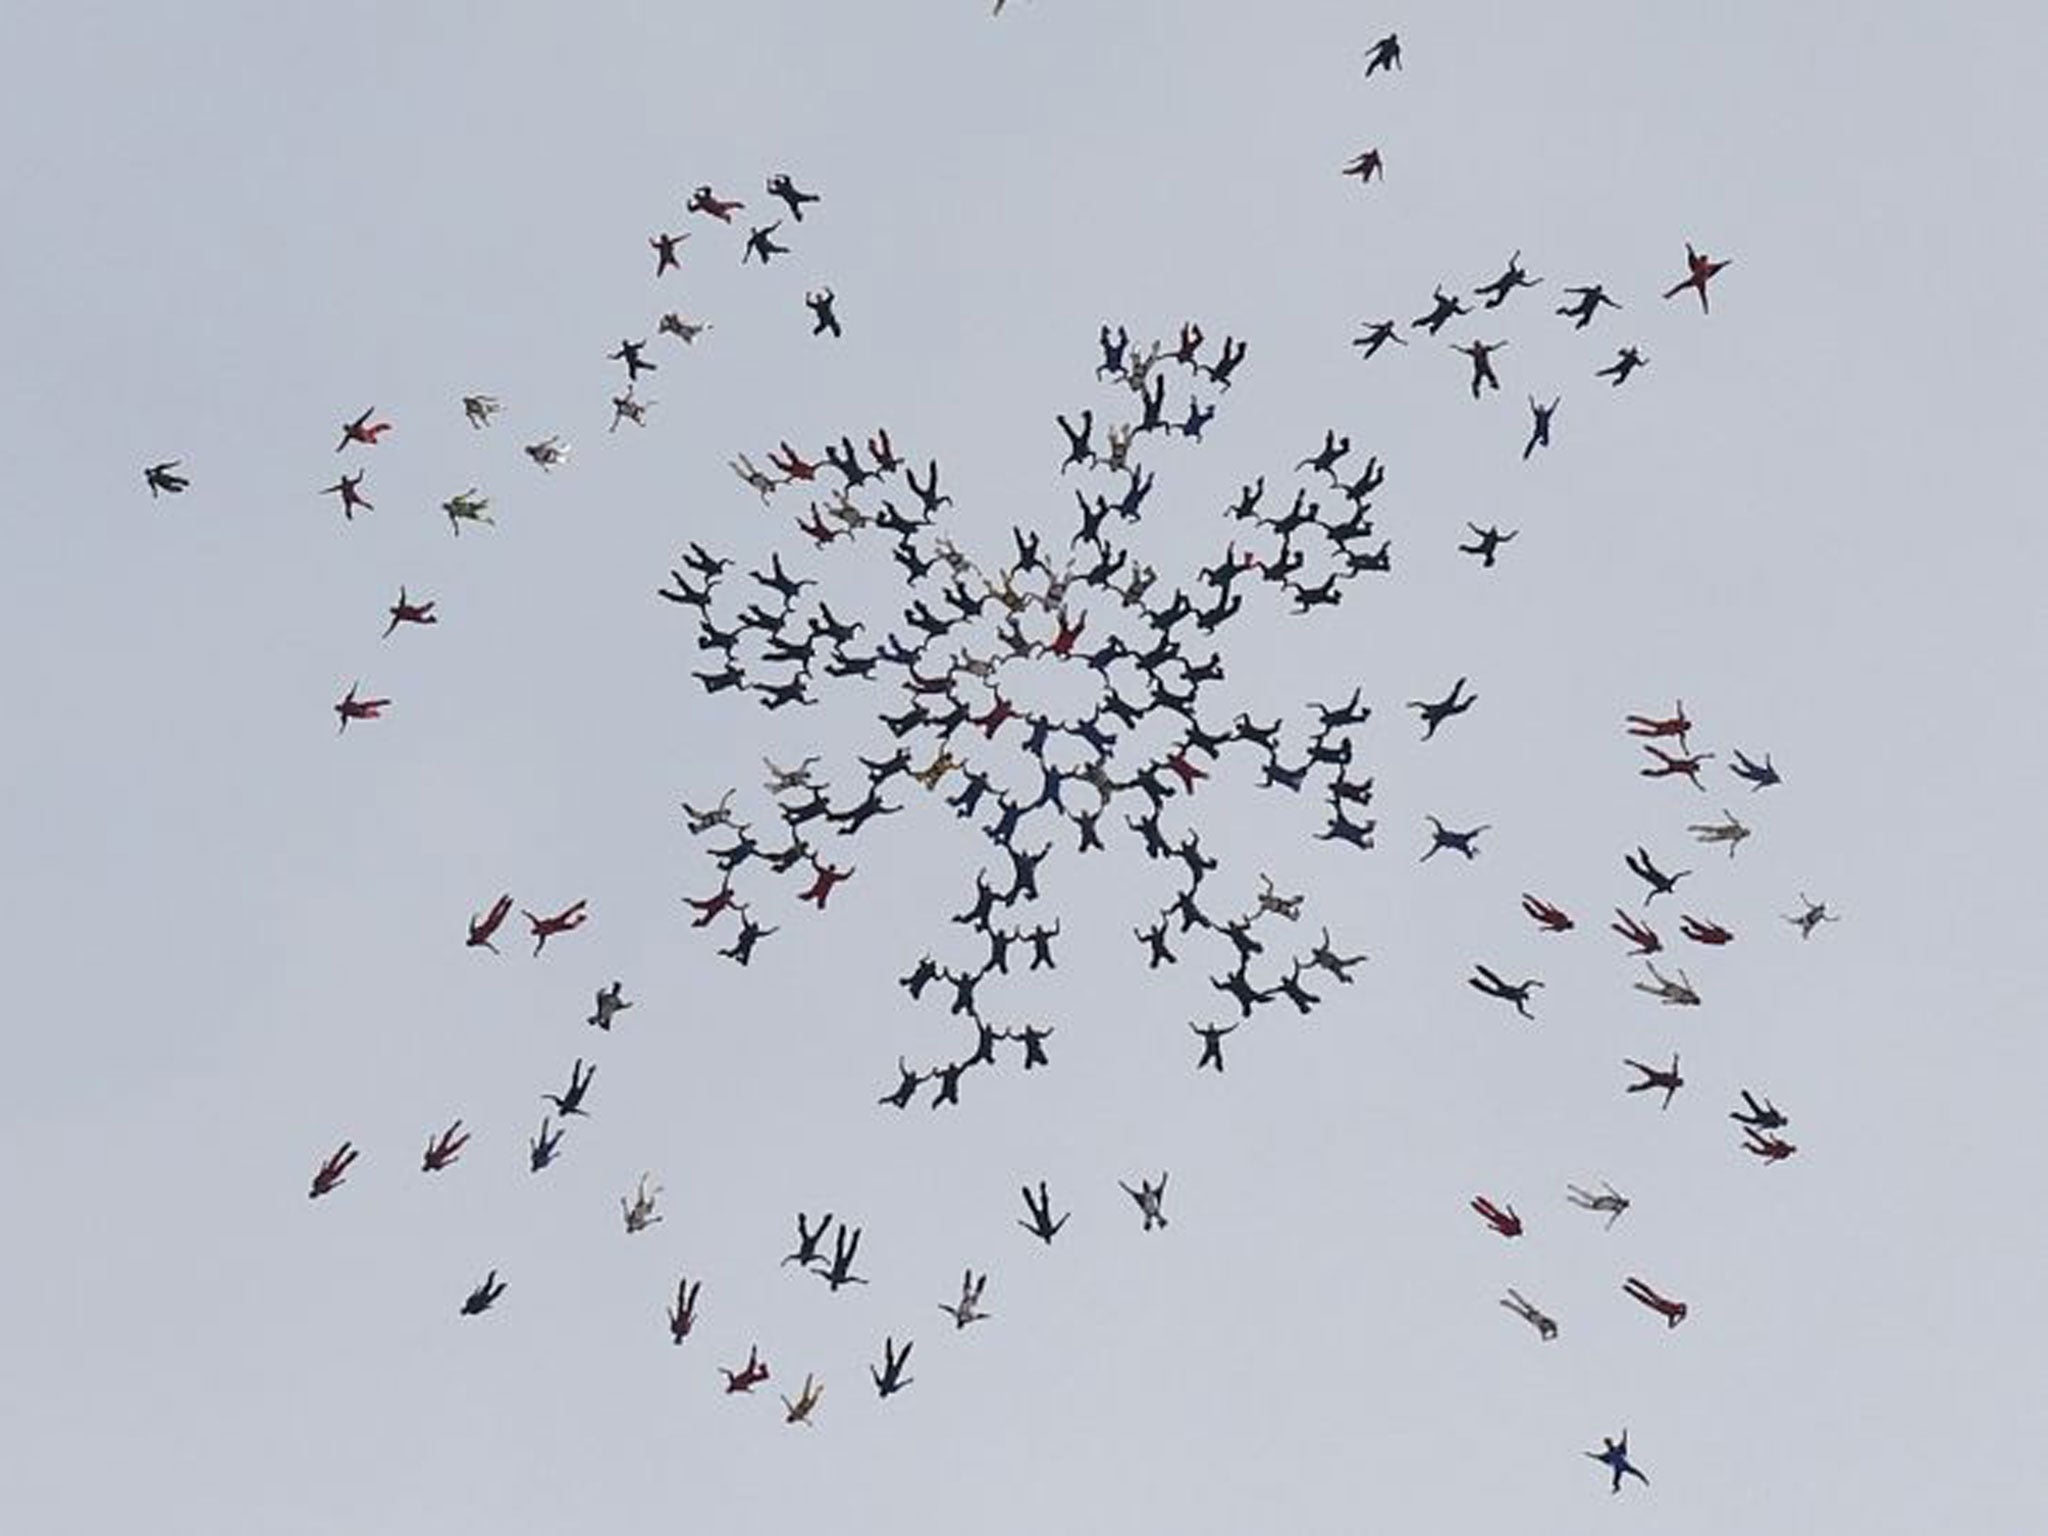 Skydivers, from all over the world, perform a group jump, the day after two skydivers were killed after colliding in midair during a jump from Skydive Arizona at Eloy Municipal Airport